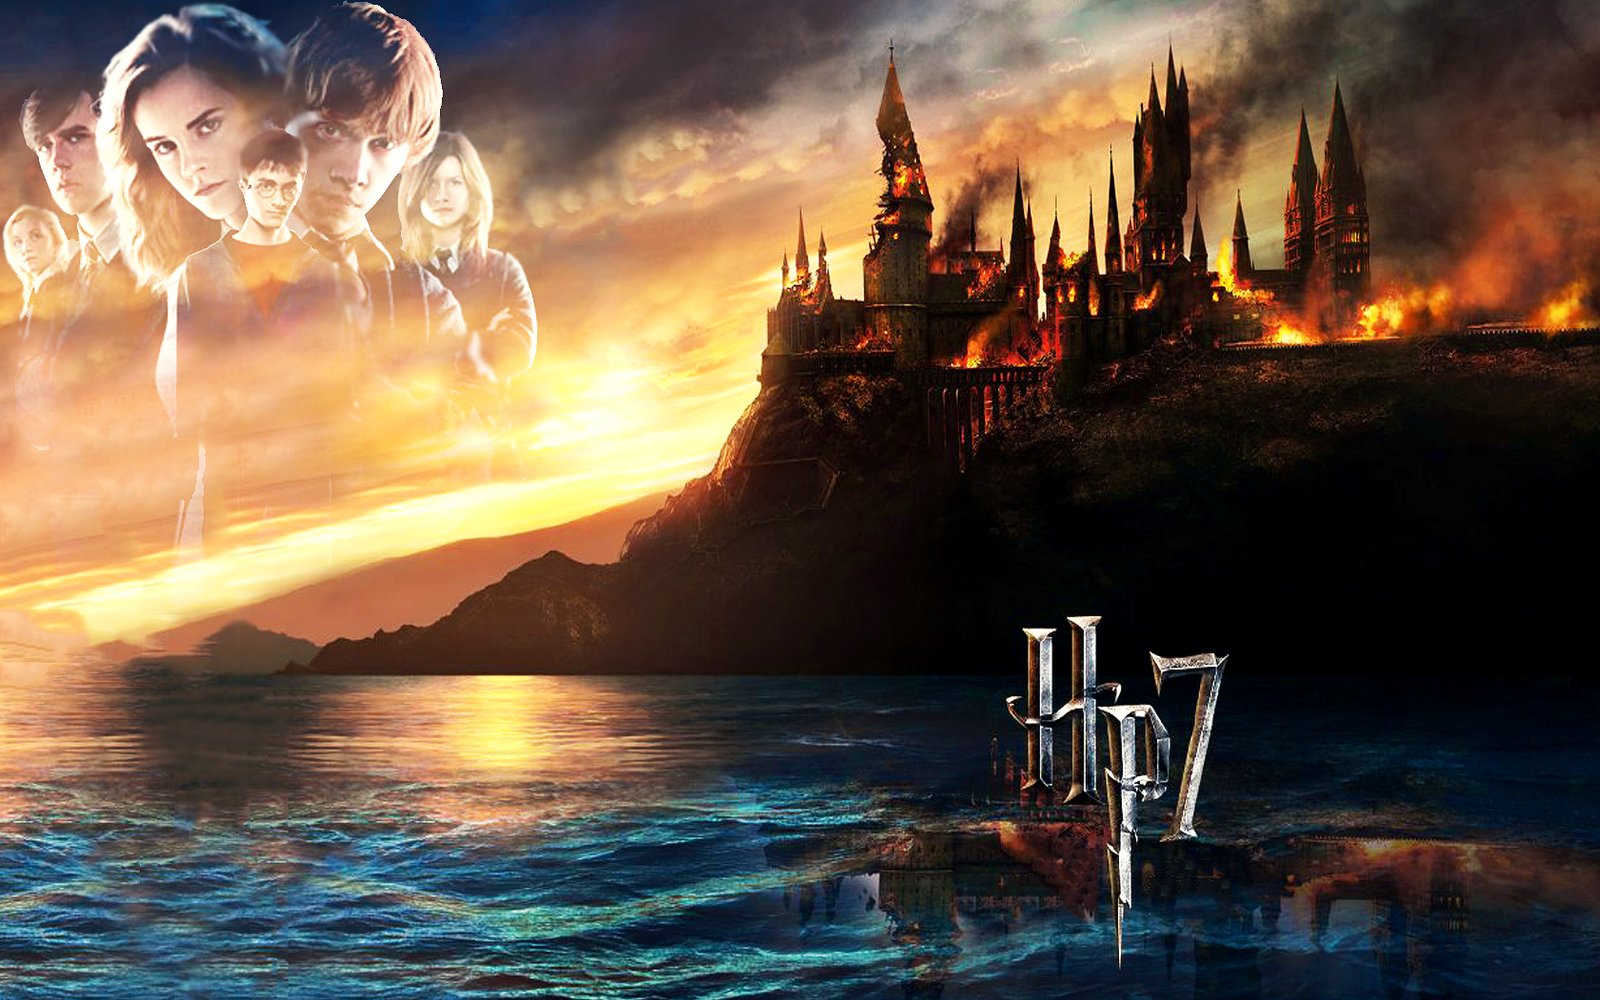 Harry Potter and the Deathly Hallows HD Wallpapers wallpapers hd